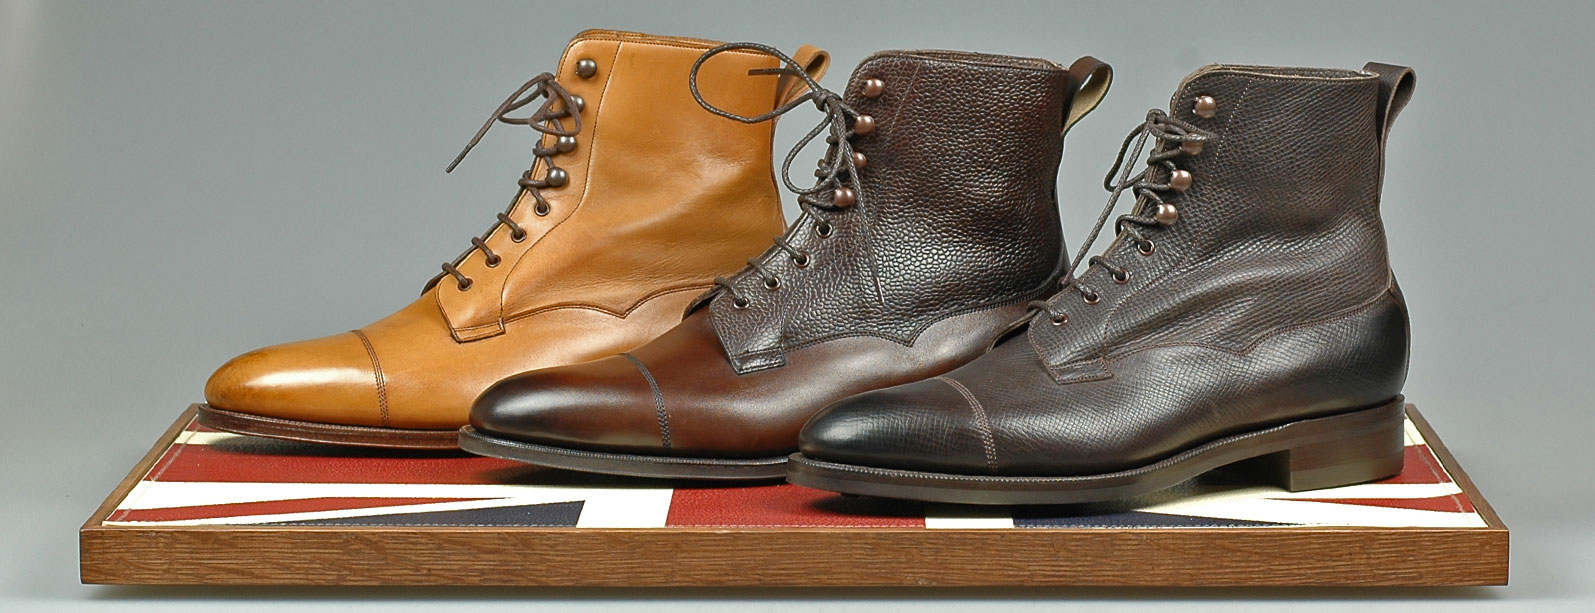 A boot of unparalleled class - the Edward Green Galway - Inspiration ...